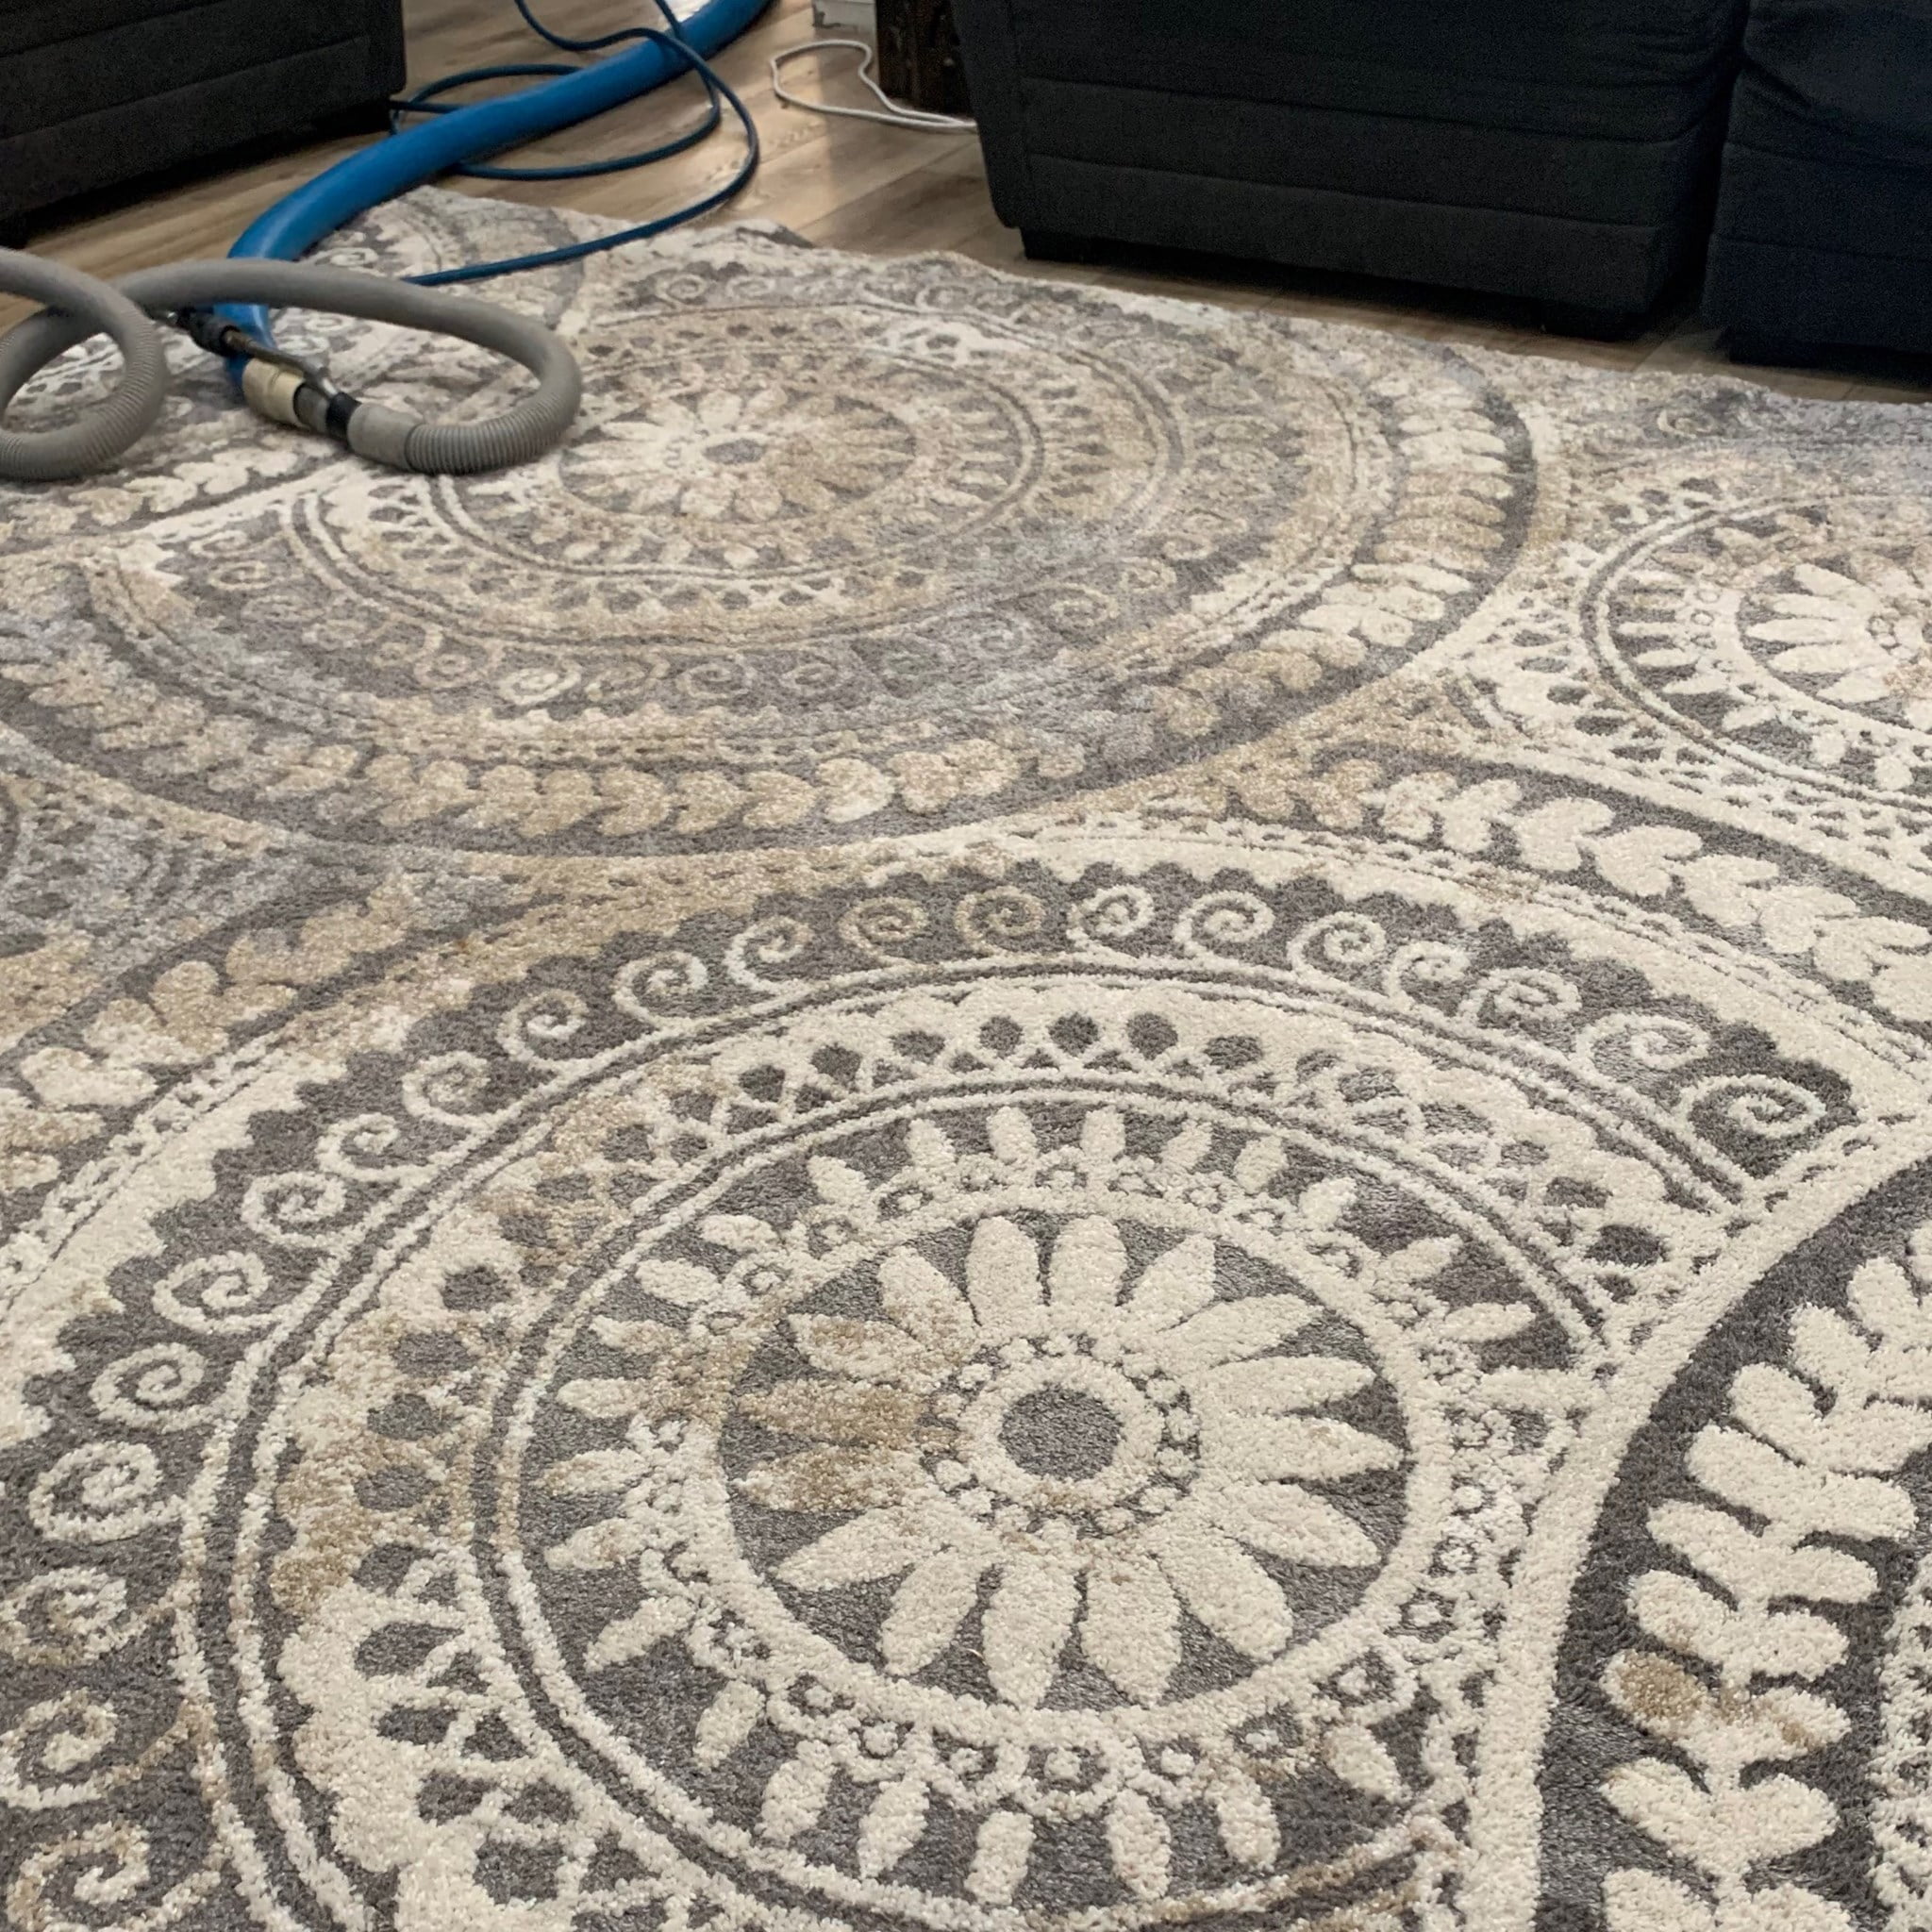 Area Rug Cleaning Service on Going